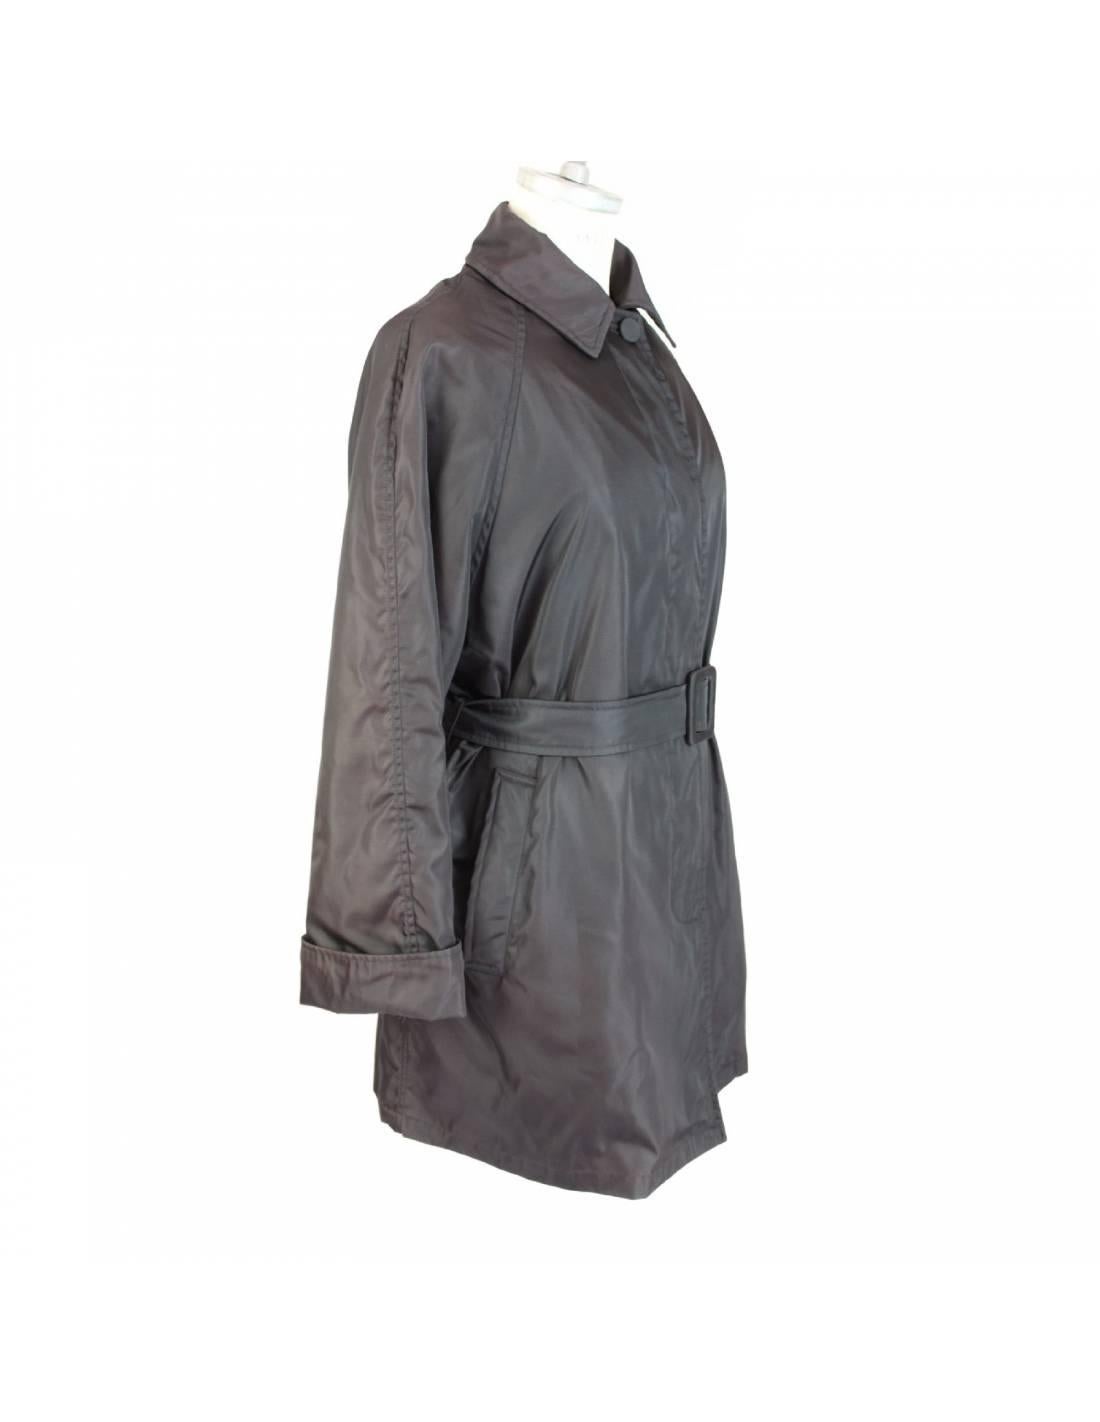 Beautiful waterproof coat by Prada brown 60% acetate 40% cupro. The coat is  completely padded on the sleeves, but the padding can be removed. It has two pockets on the sides and a belt. Made in Italy, 2000s, excellent condition.

SIZE 42 IT 8 US 10